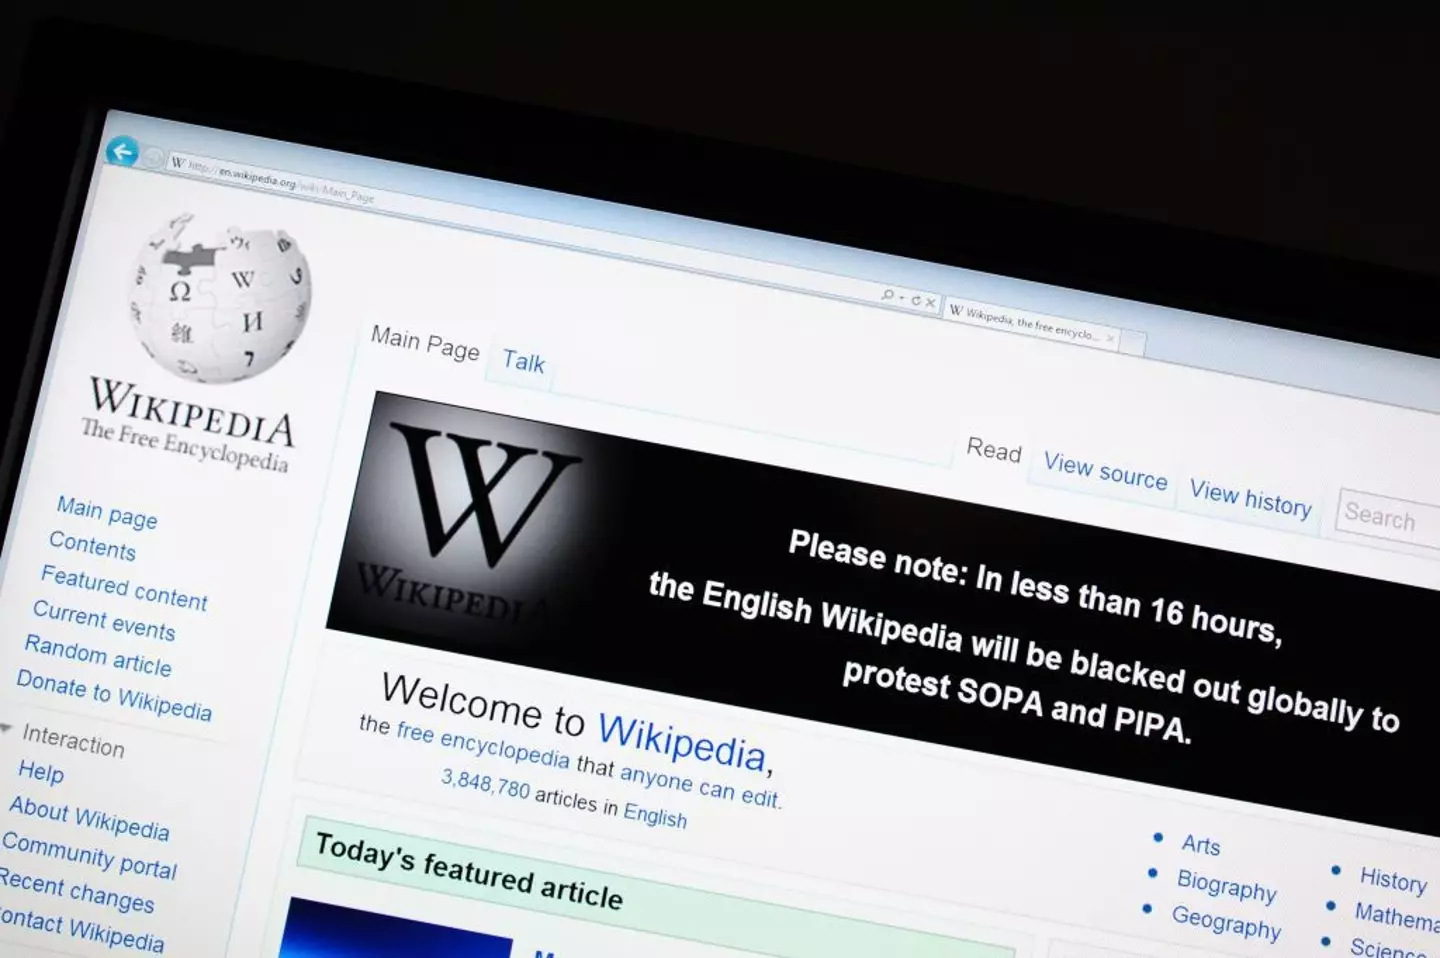 Wikipedia regularly asks users to donate cash to keep the free online encyclopaedia going.